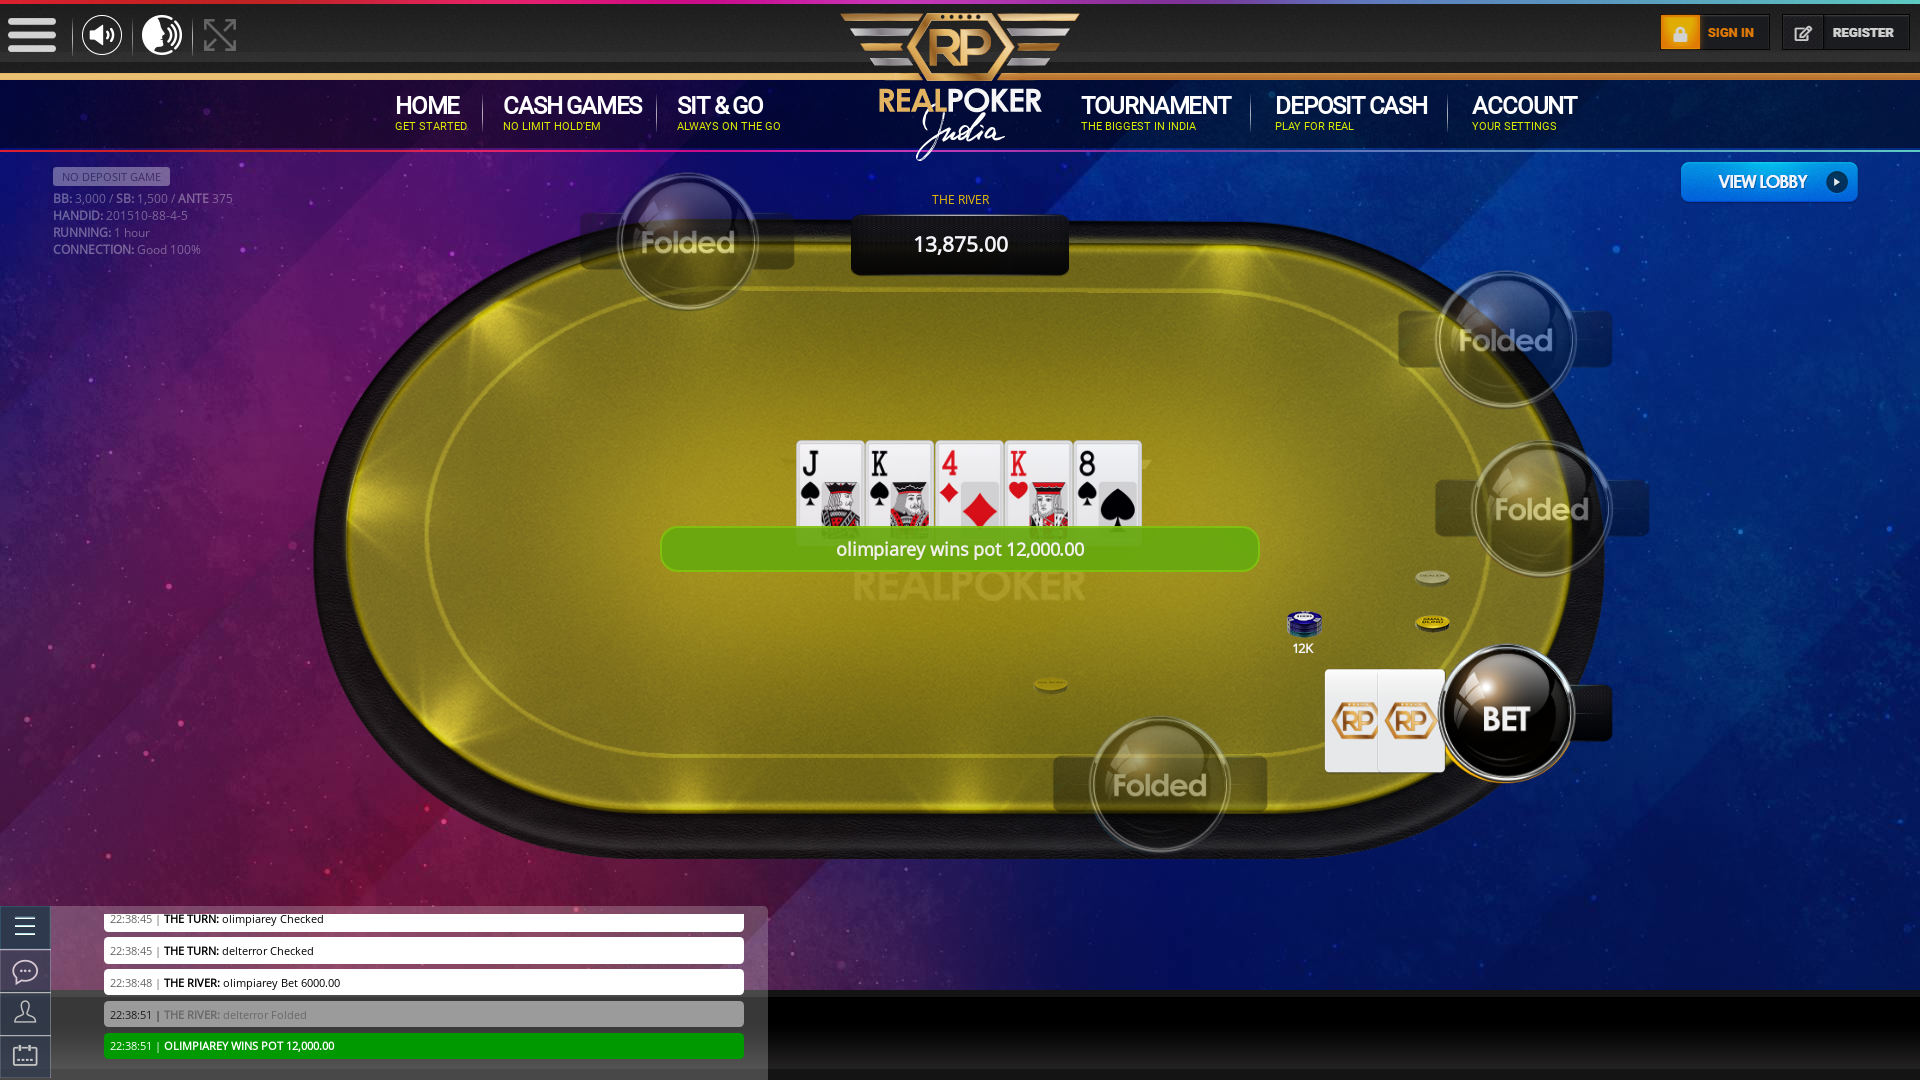 Real Indian poker on a 10 player table in the 70th minute of the game